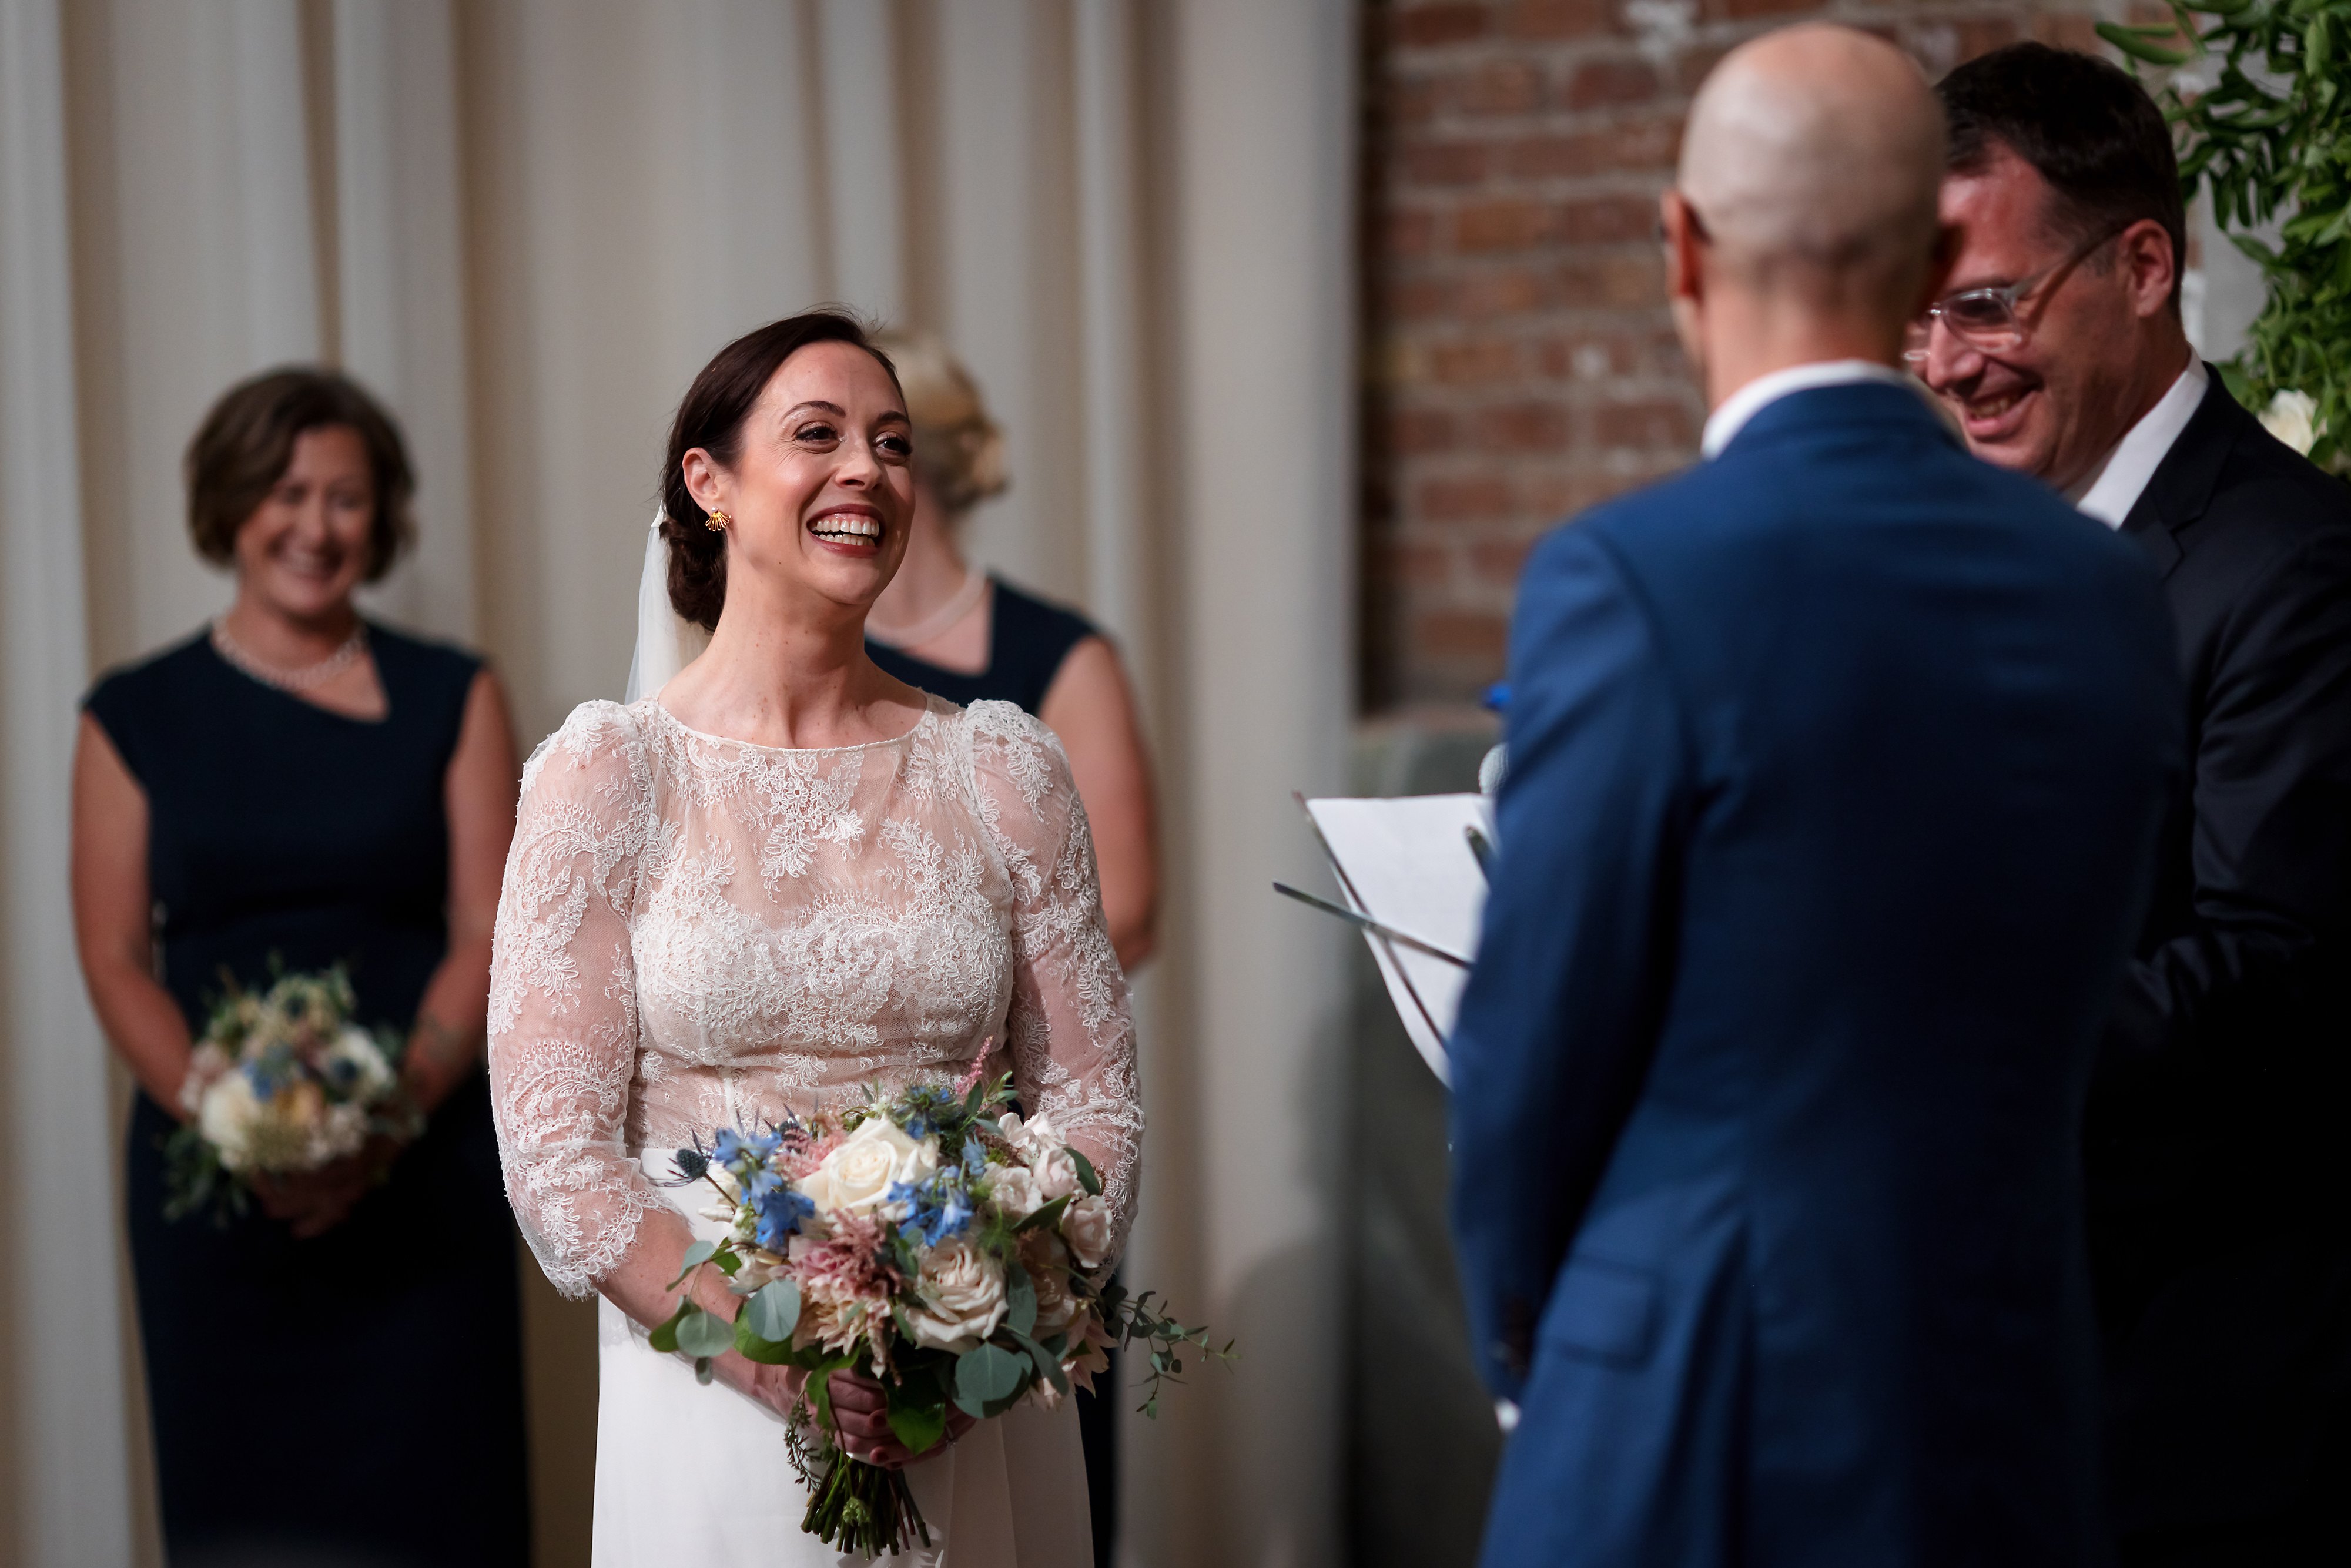 Bride laughs during wedding ceremony at The Fairlie